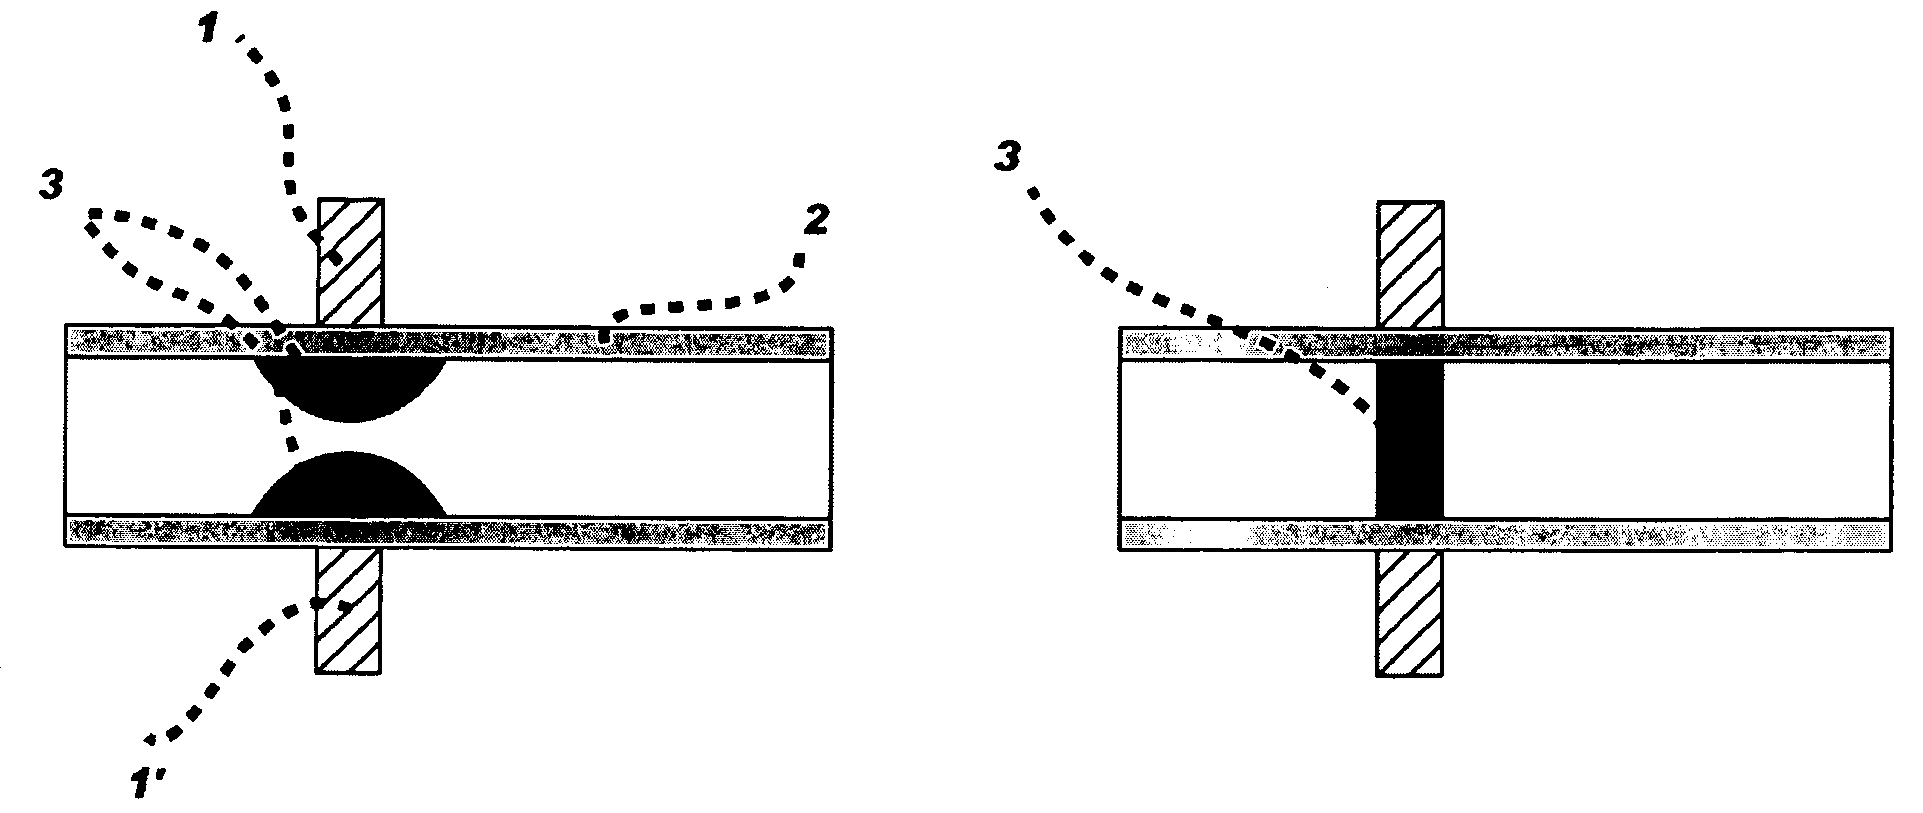 Device and Method for Manipulating and Mixing Magnetic Particles in a Liquid Medium